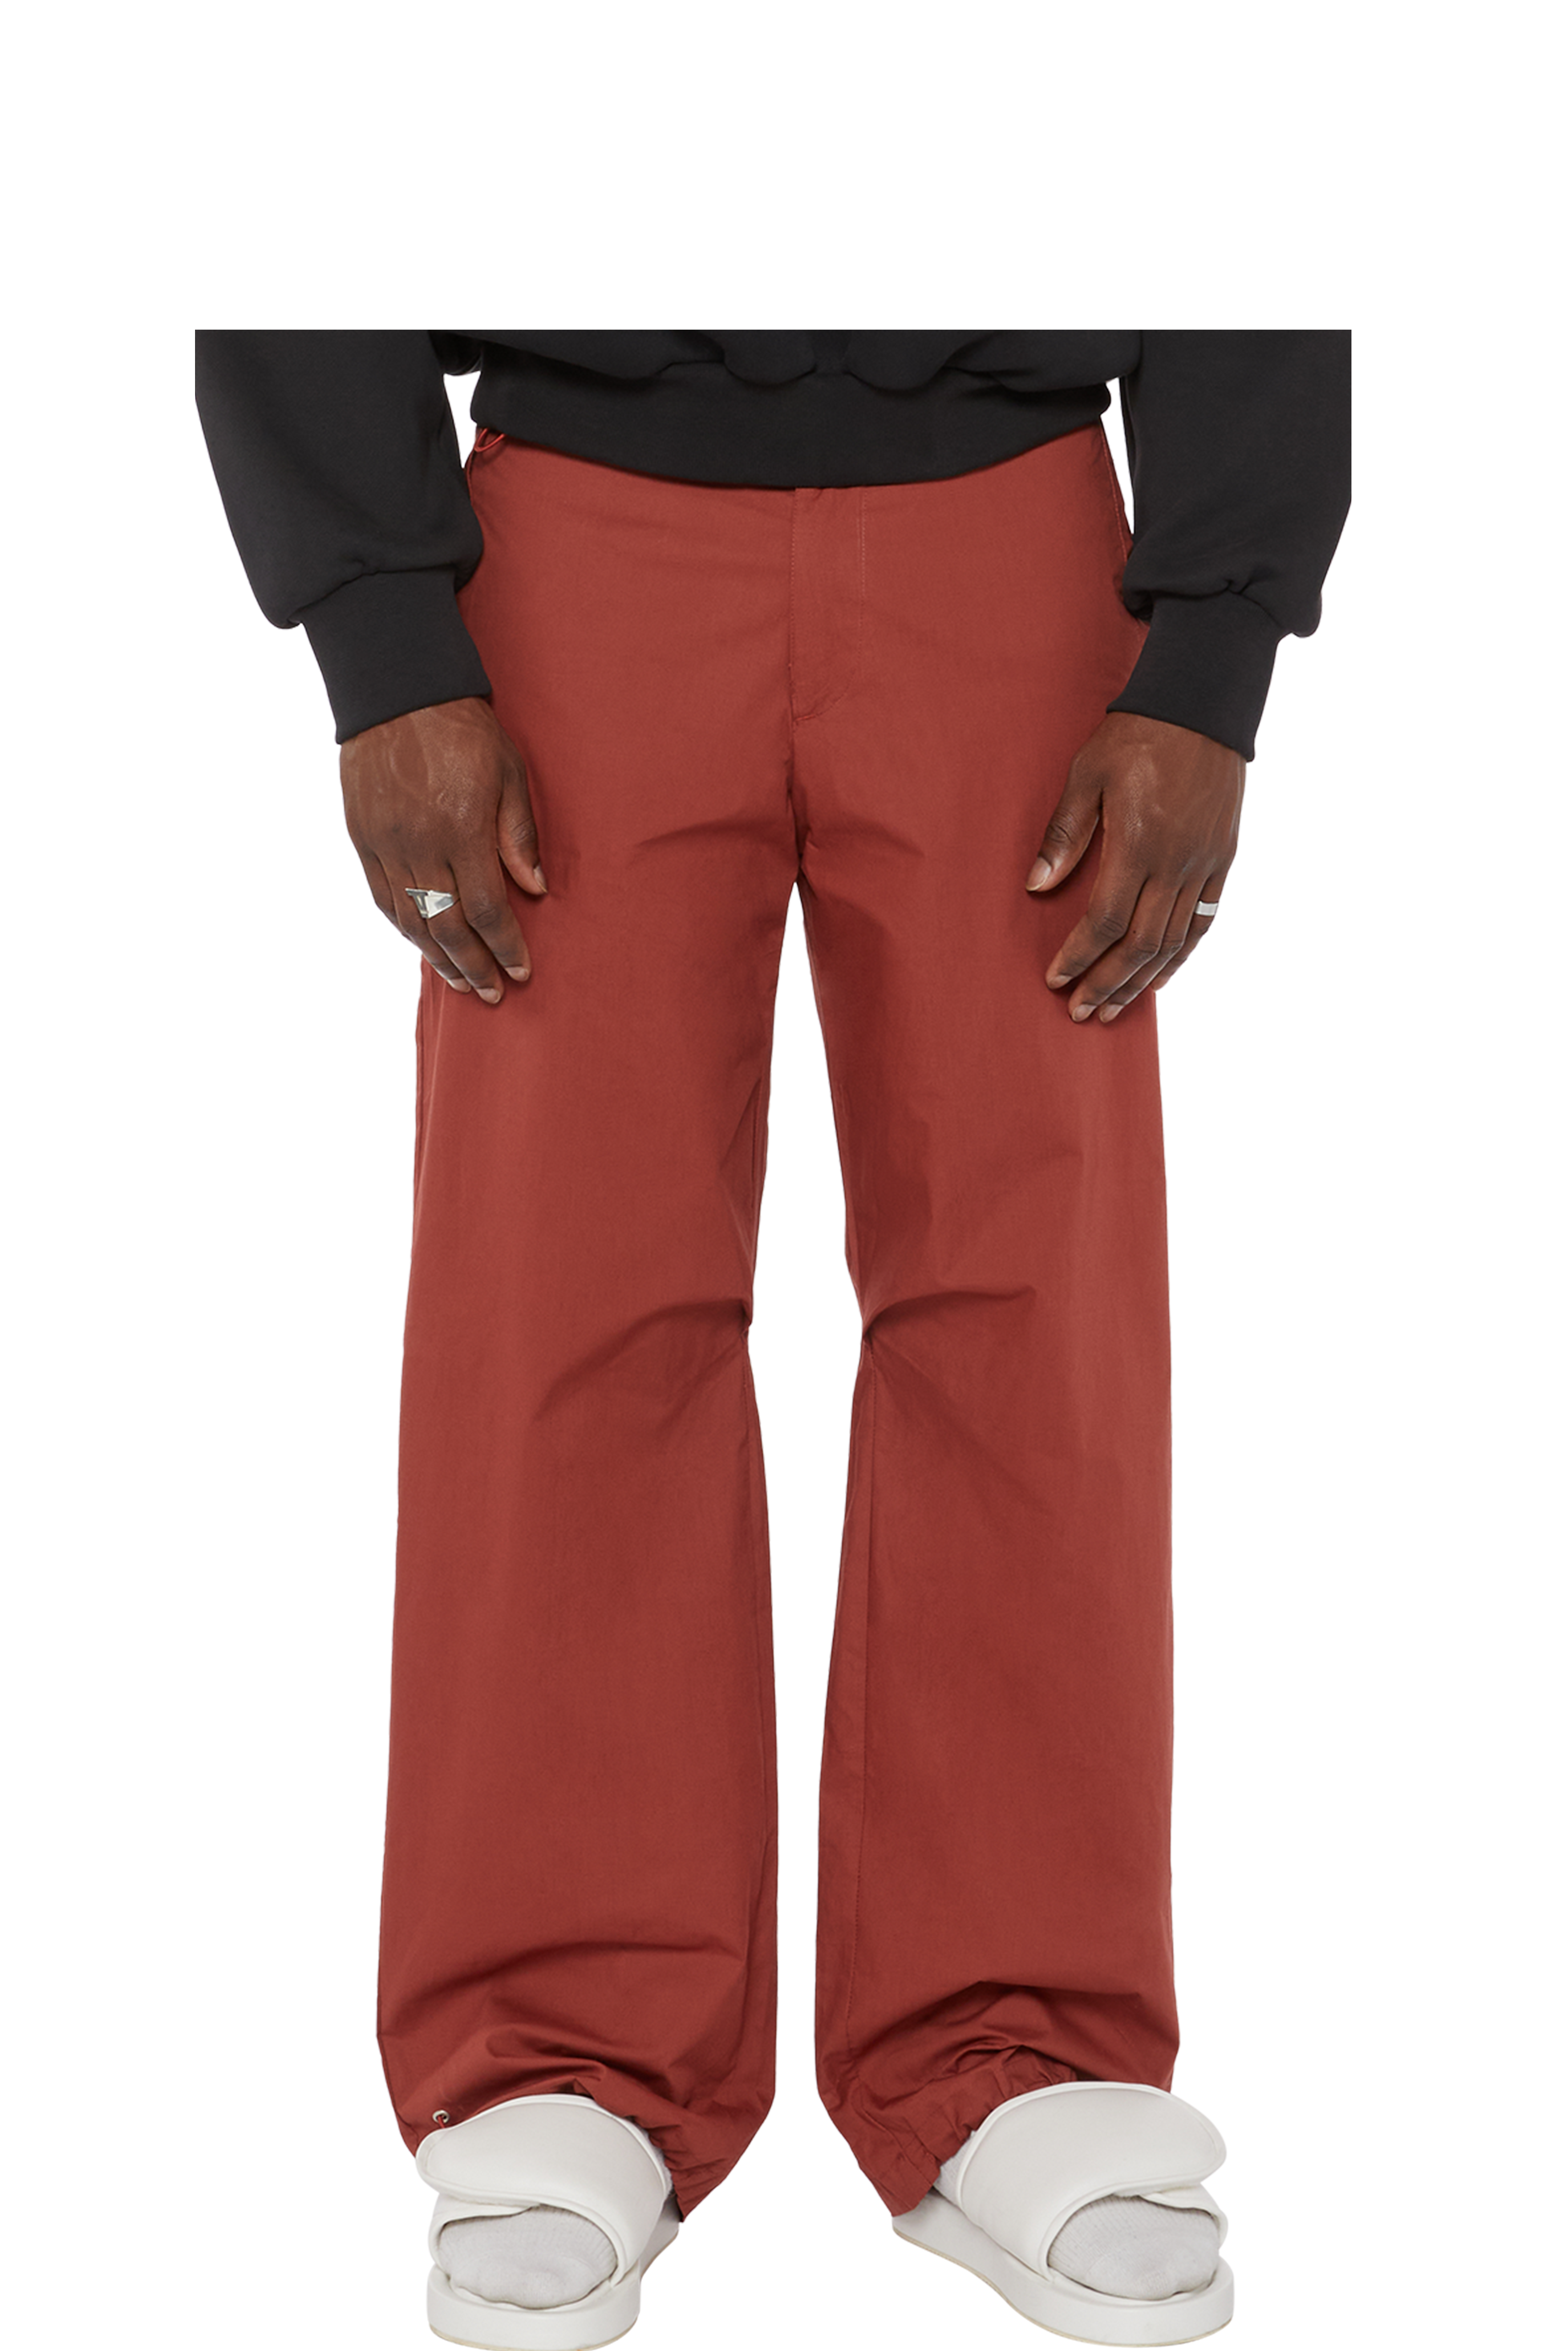 Men Relaxed Fit Dance Cargo Trousers  The Dance Bible